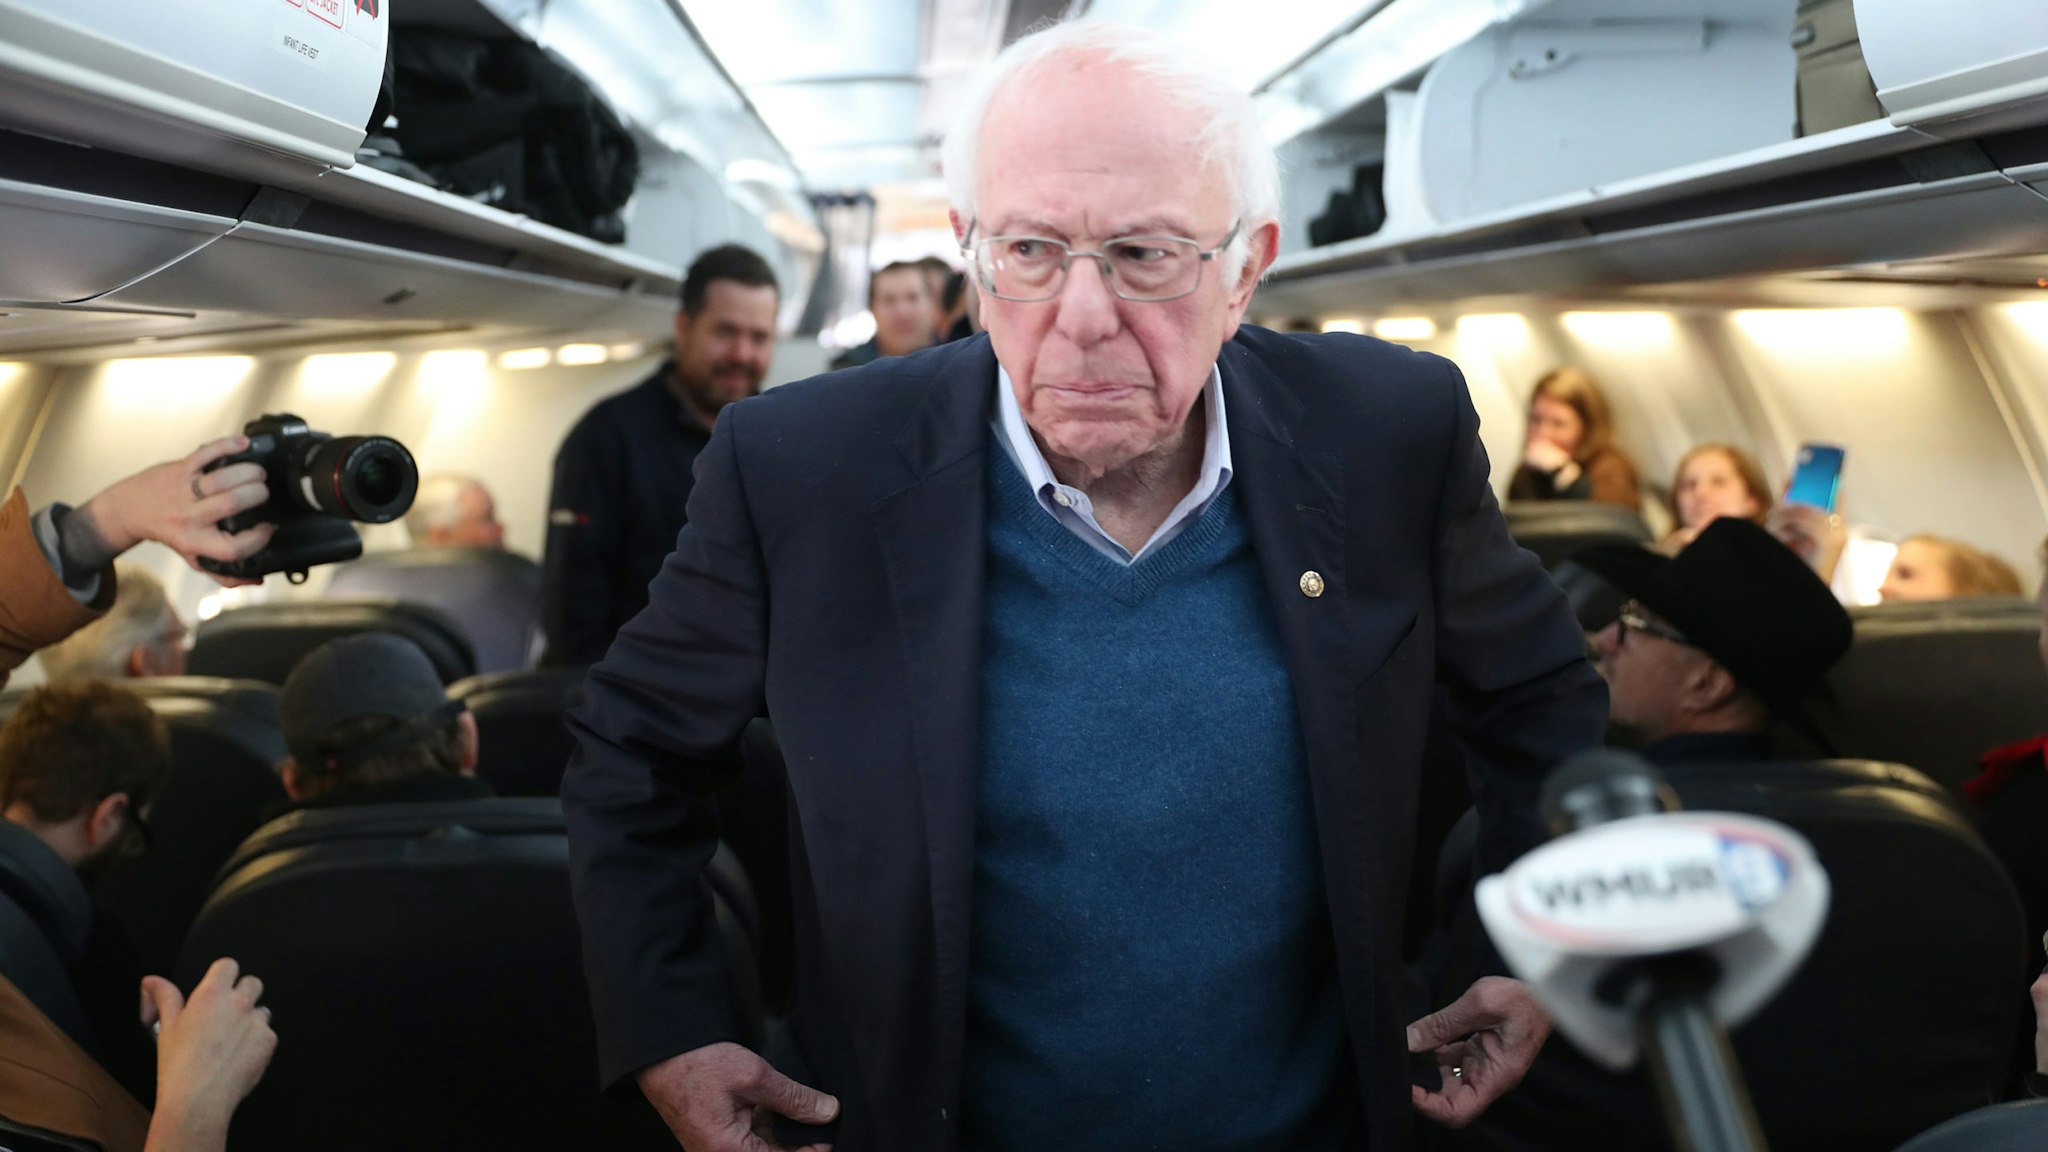 DES MOINES, IA - FEBRUARY 04: Democratic presidential candidate Sen. Bernie Sanders (I-VT) speaks to the media after boarding the plane at the Des Moines International Airport on February 04, 2020 in Des Moines, Iowa. Mr. Sanders was heading to Manchester, New Hampshire to campaign leading up to the primary on February 11 as he awaits the release of the results from the Iowa caucus. (Photo by Joe Raedle/Getty Images)